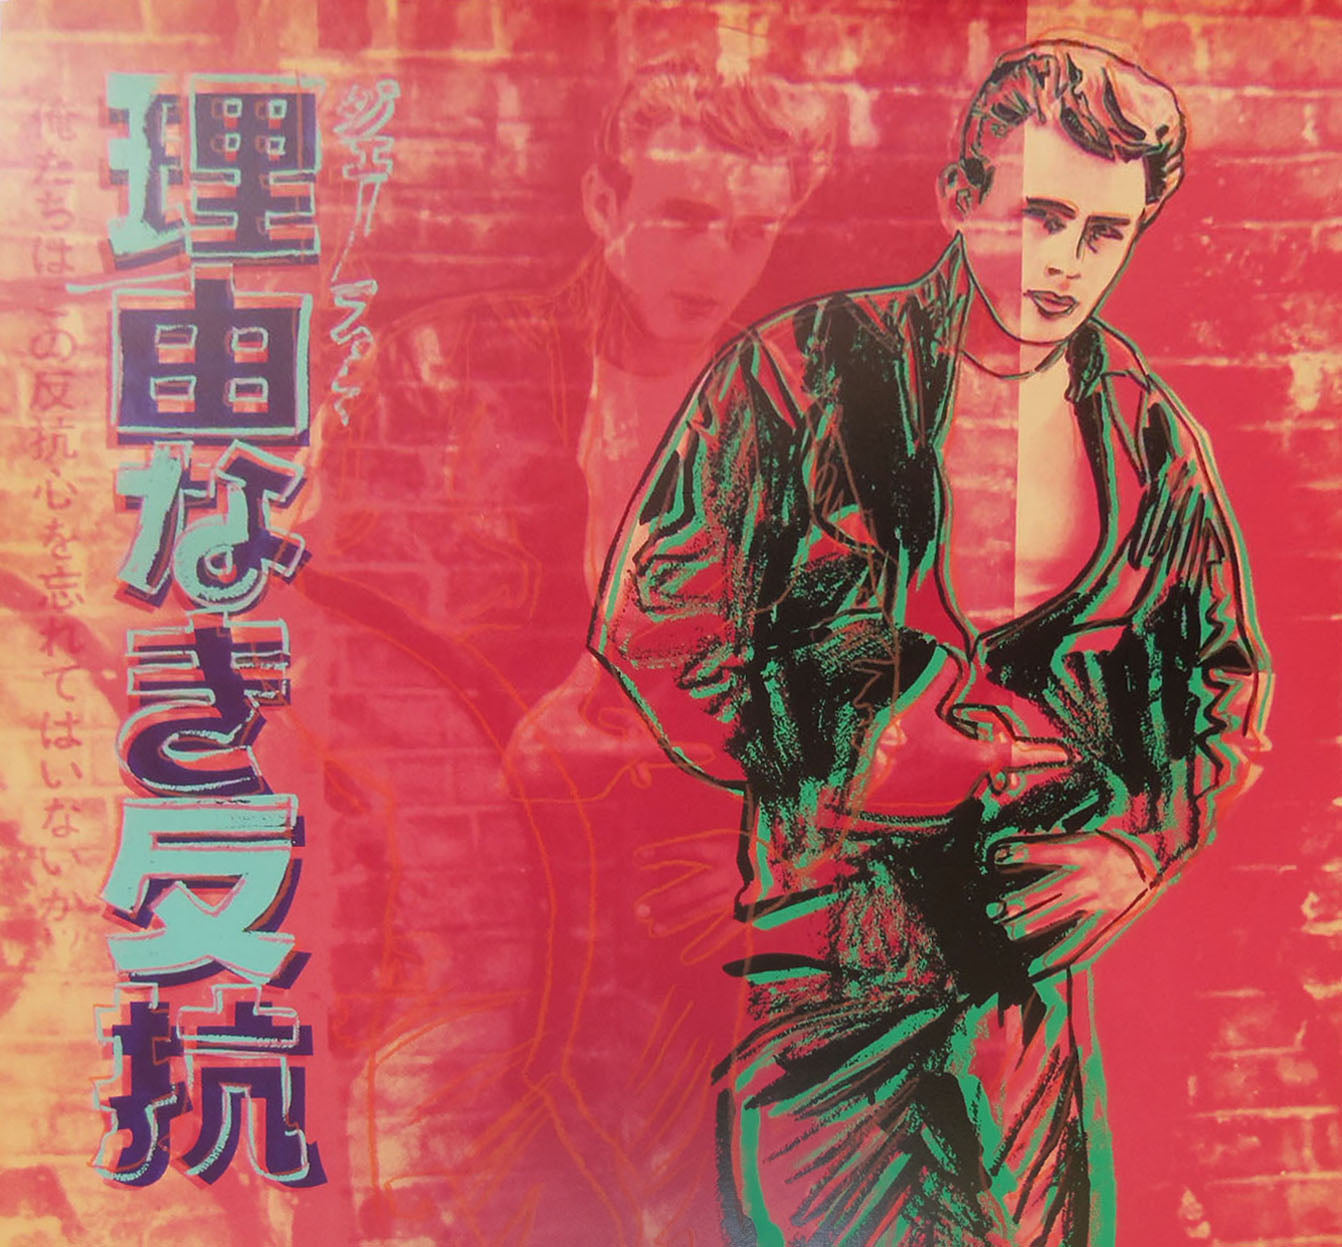 Andy Warhol Rebel Without a Cause (James Dean) (Feldman II.355) 1985